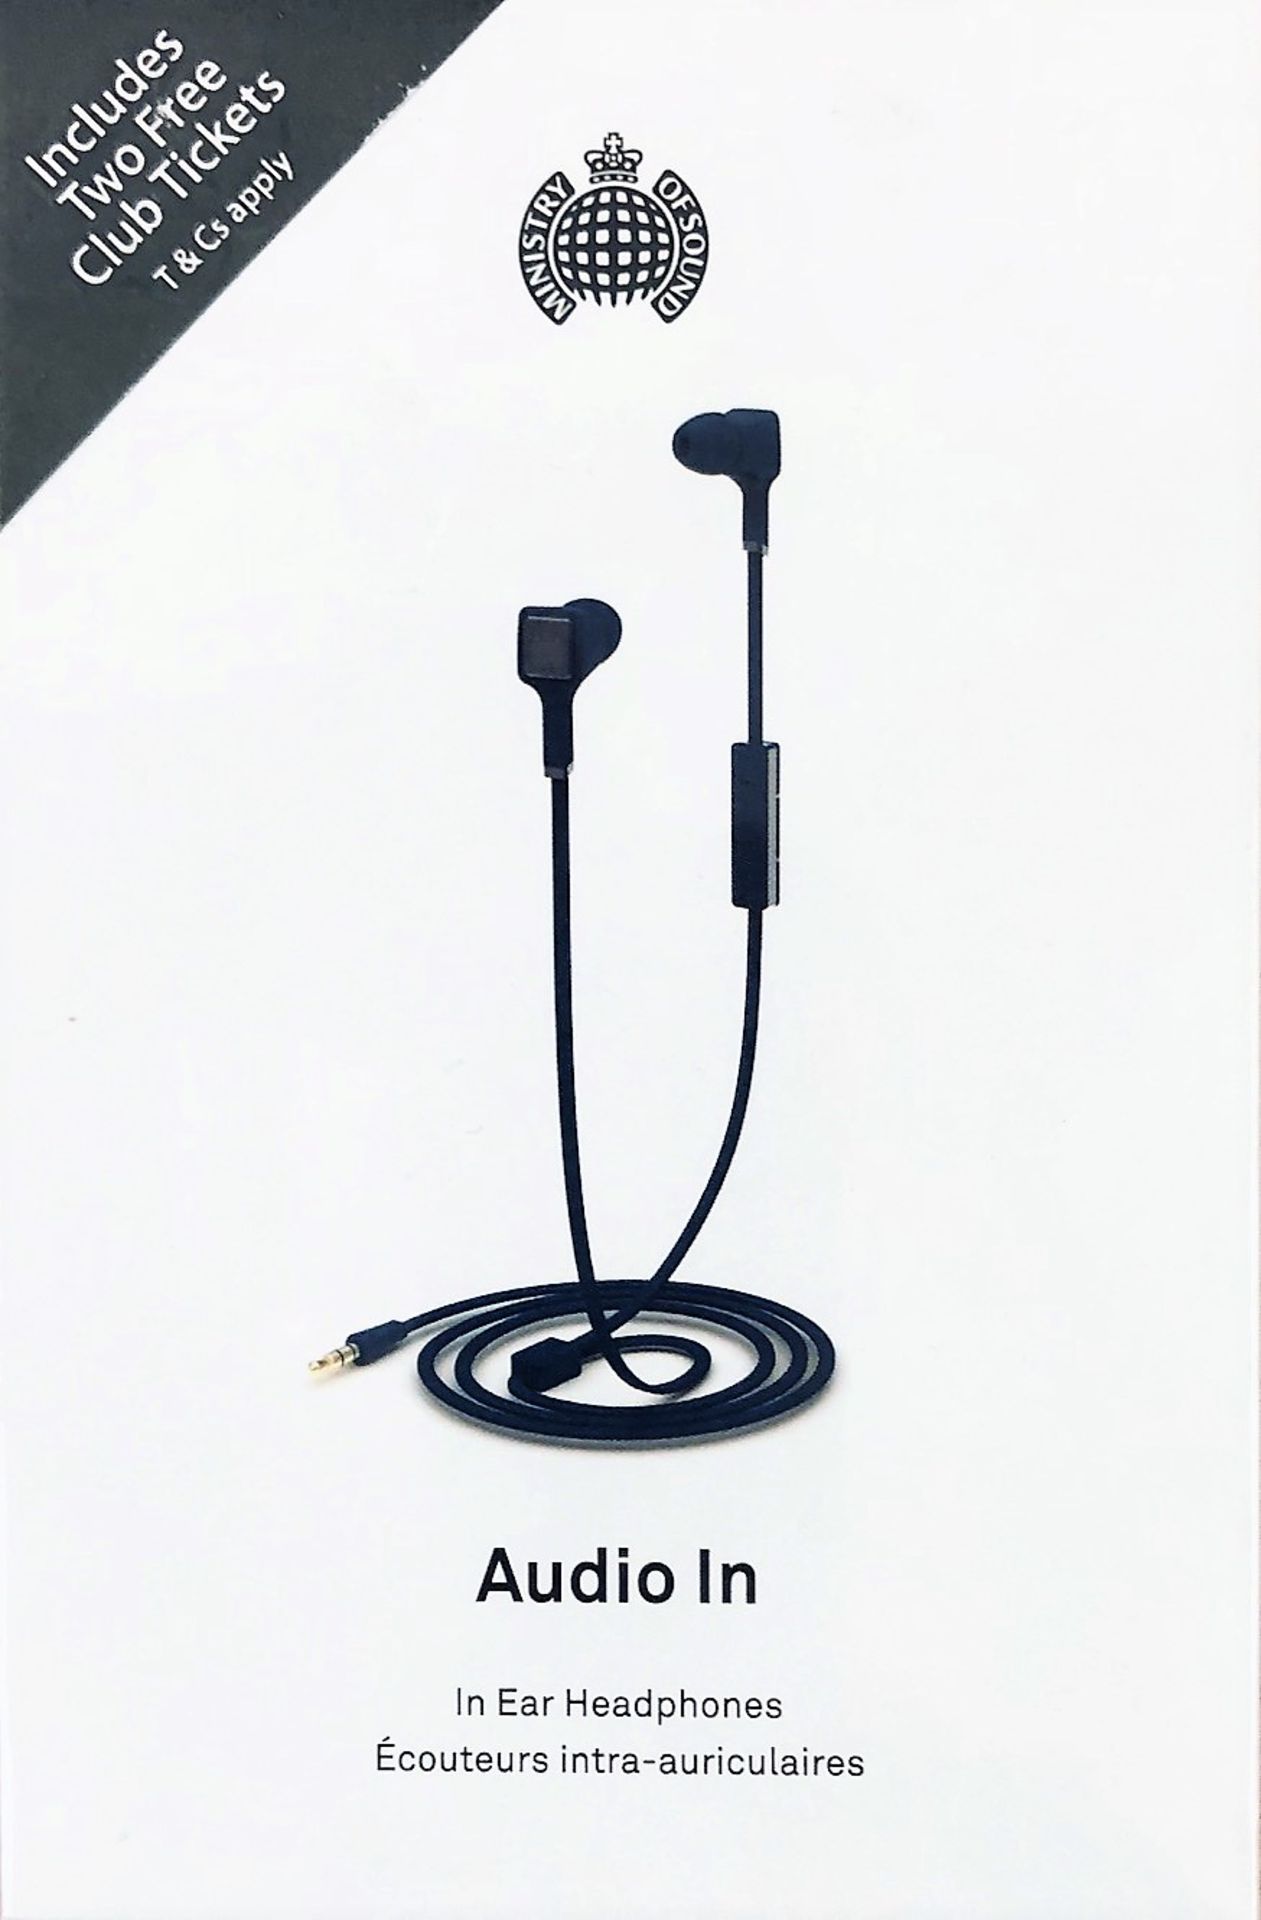 V Brand New Ministry Of Sound Audio In - In-Ear Headphones - RRP £39.99 - Blue/Grey - Image 2 of 2